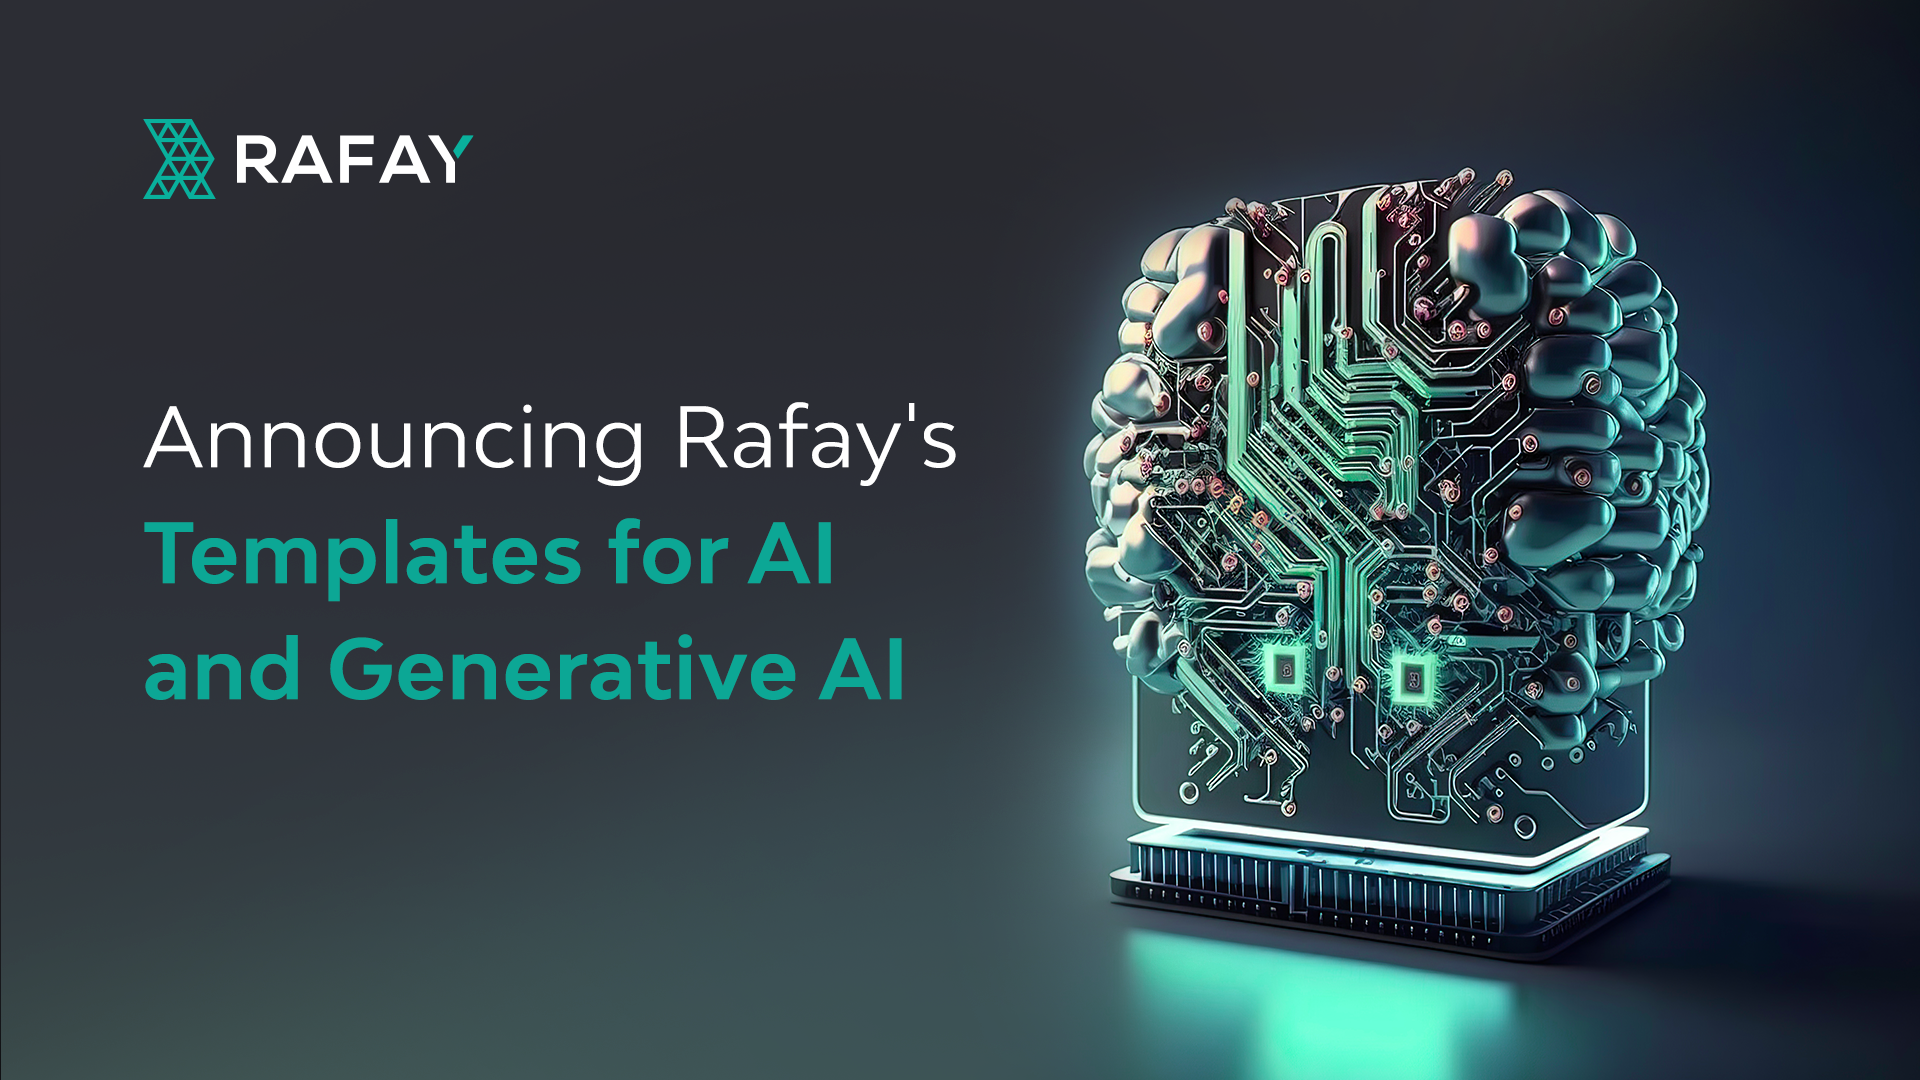 Image for Announcing Rafay’s Templates for AI and Generative AI